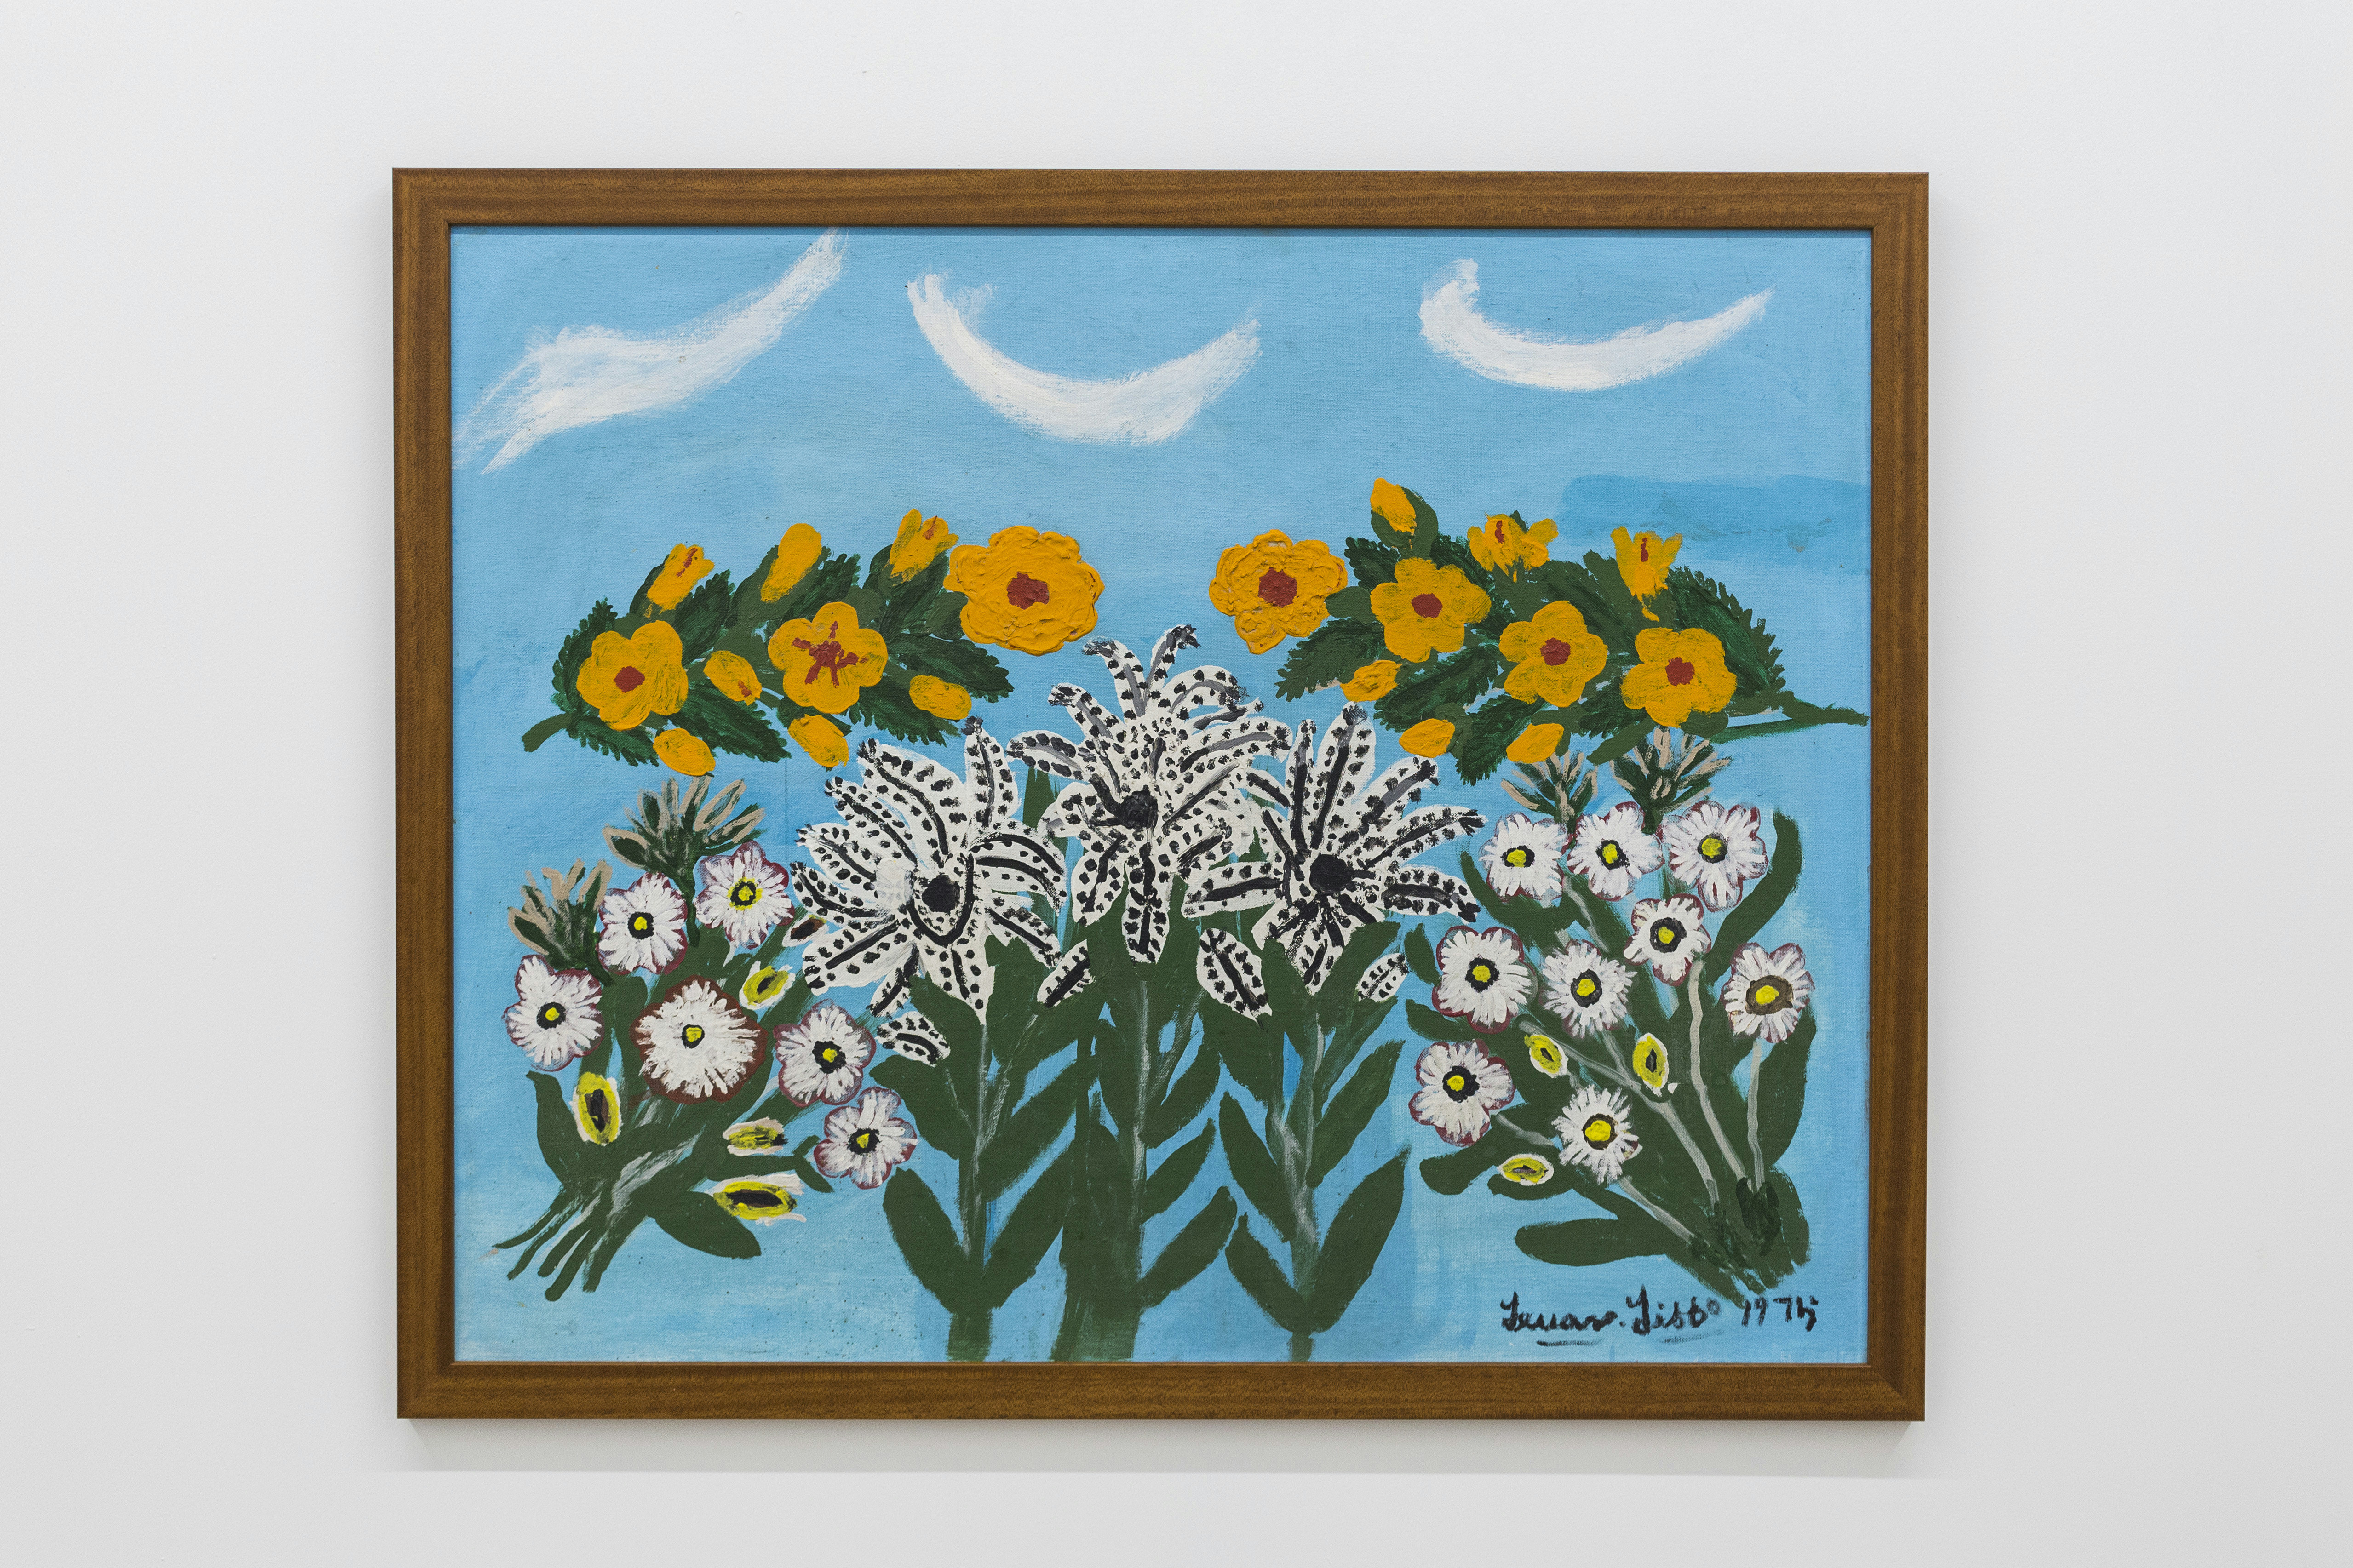 Flowers II (1975), Teuane Tibbo, collection of Malcolm McNeill — Enjoy Contemporary Art Space